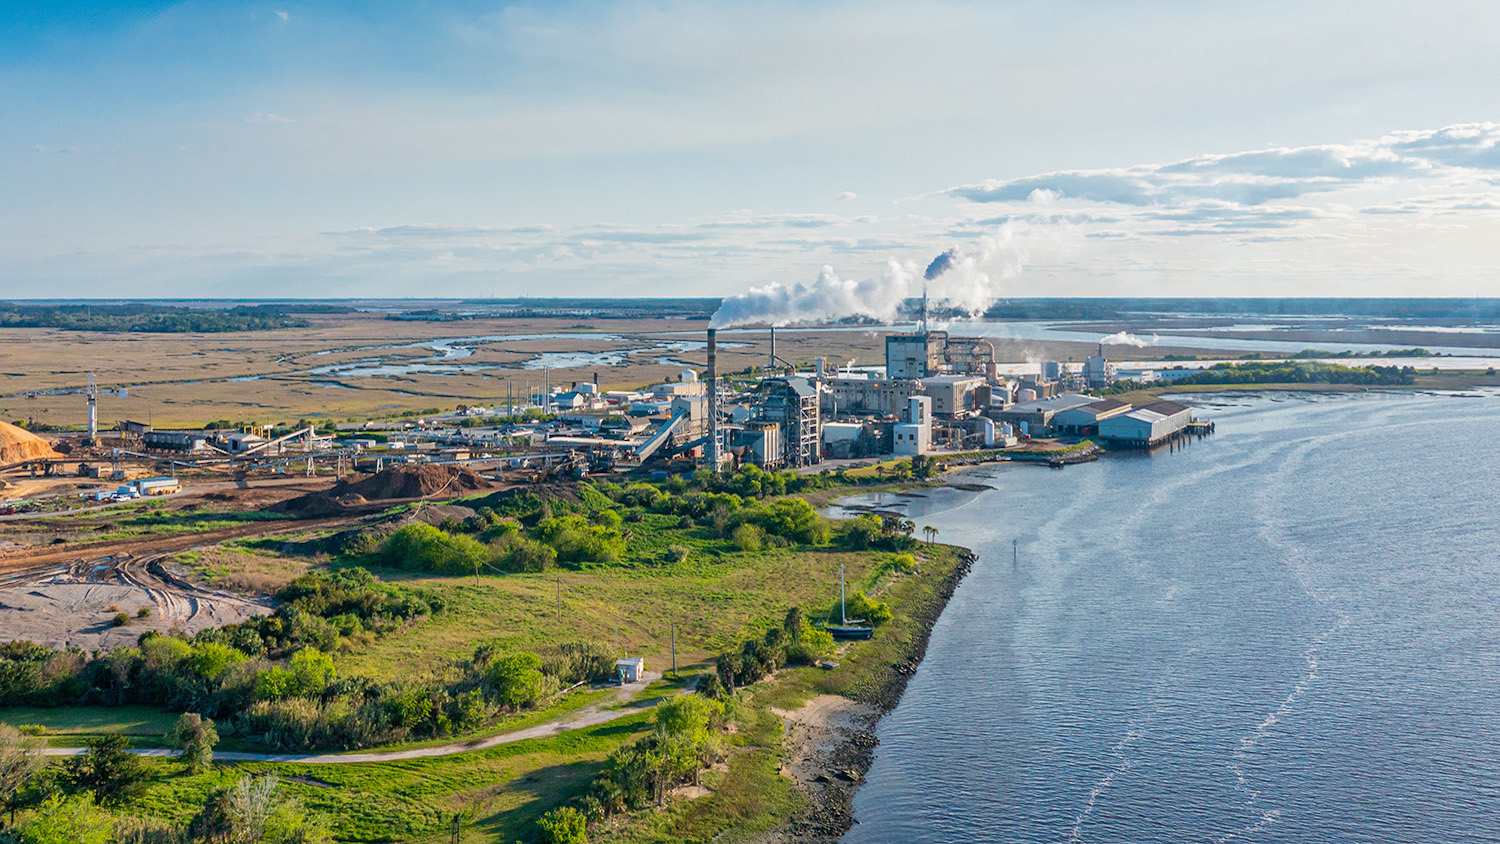 Aerial photo of a paper mill in Fernandina Beach near Jacksonville, Florida - NC State Researchers Developing Climate-Friendly Solution for Pulp and Paper Industry - College of Natural Resources at NC State University